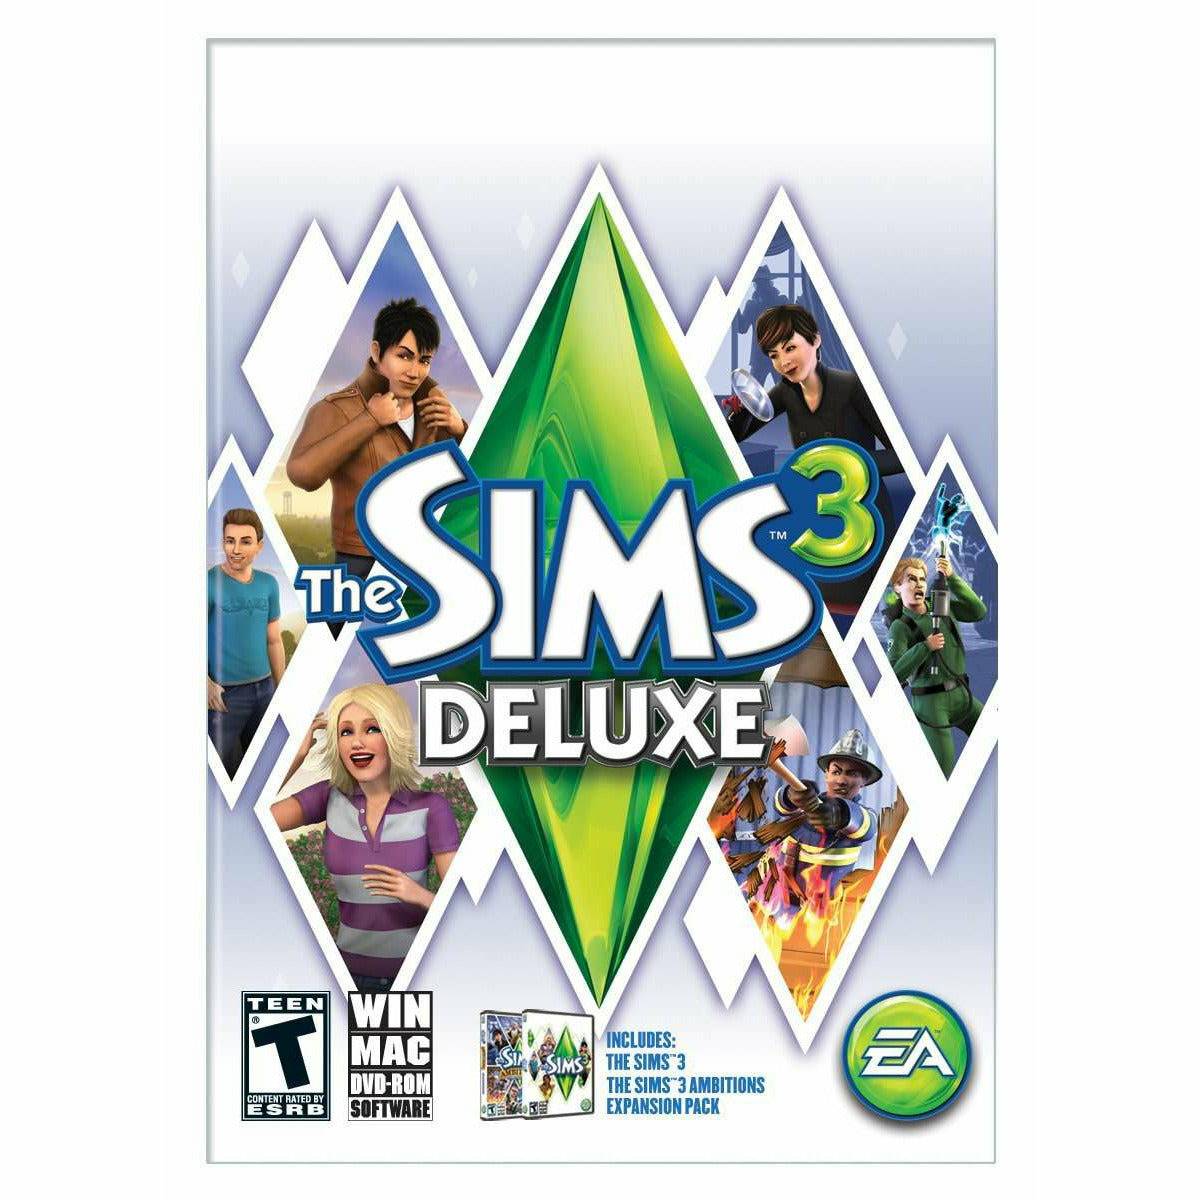 The Sims 3 Deluxe - PC/Mac